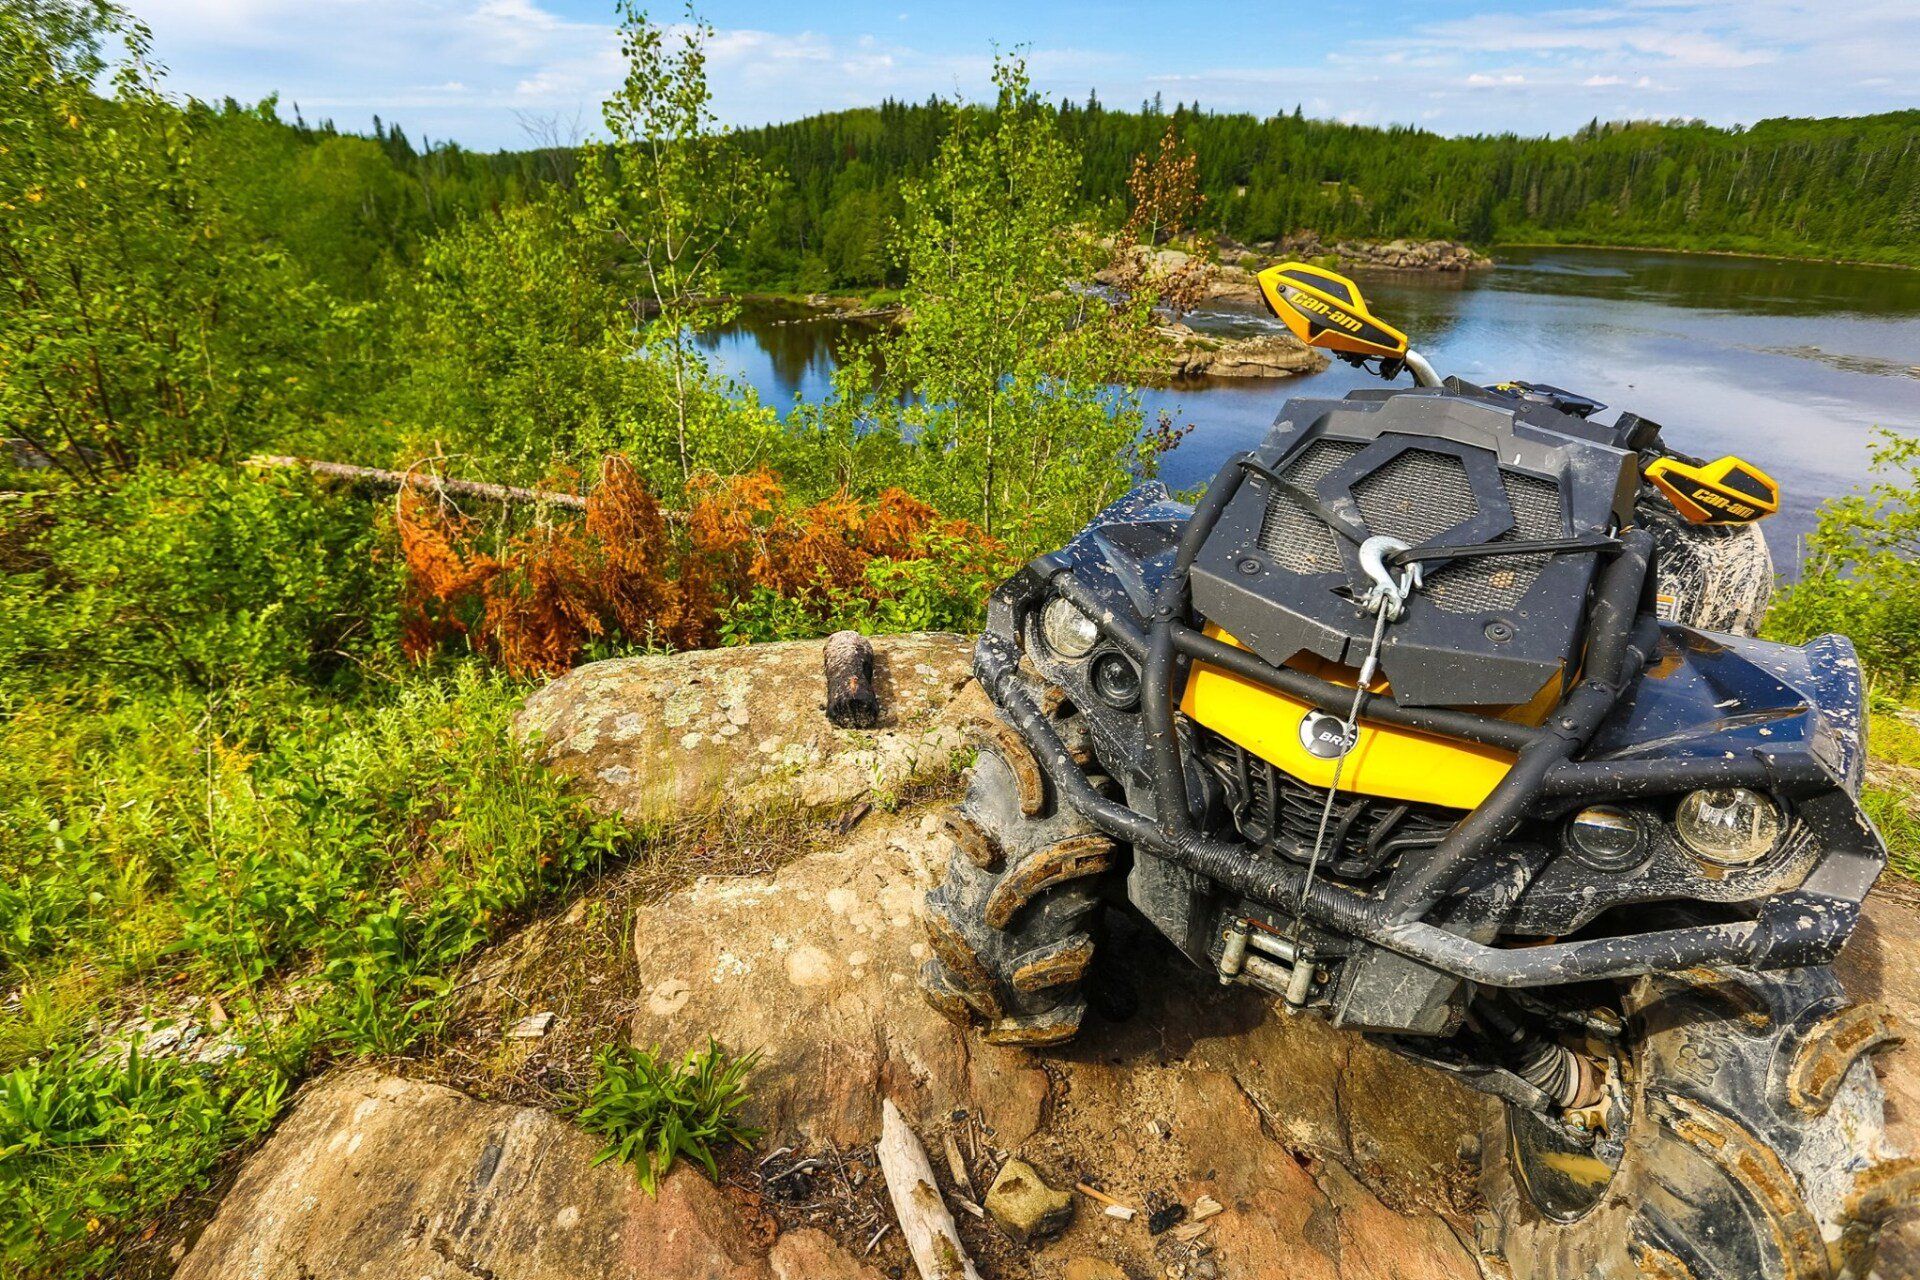 ATV on rock with river and forest in the background